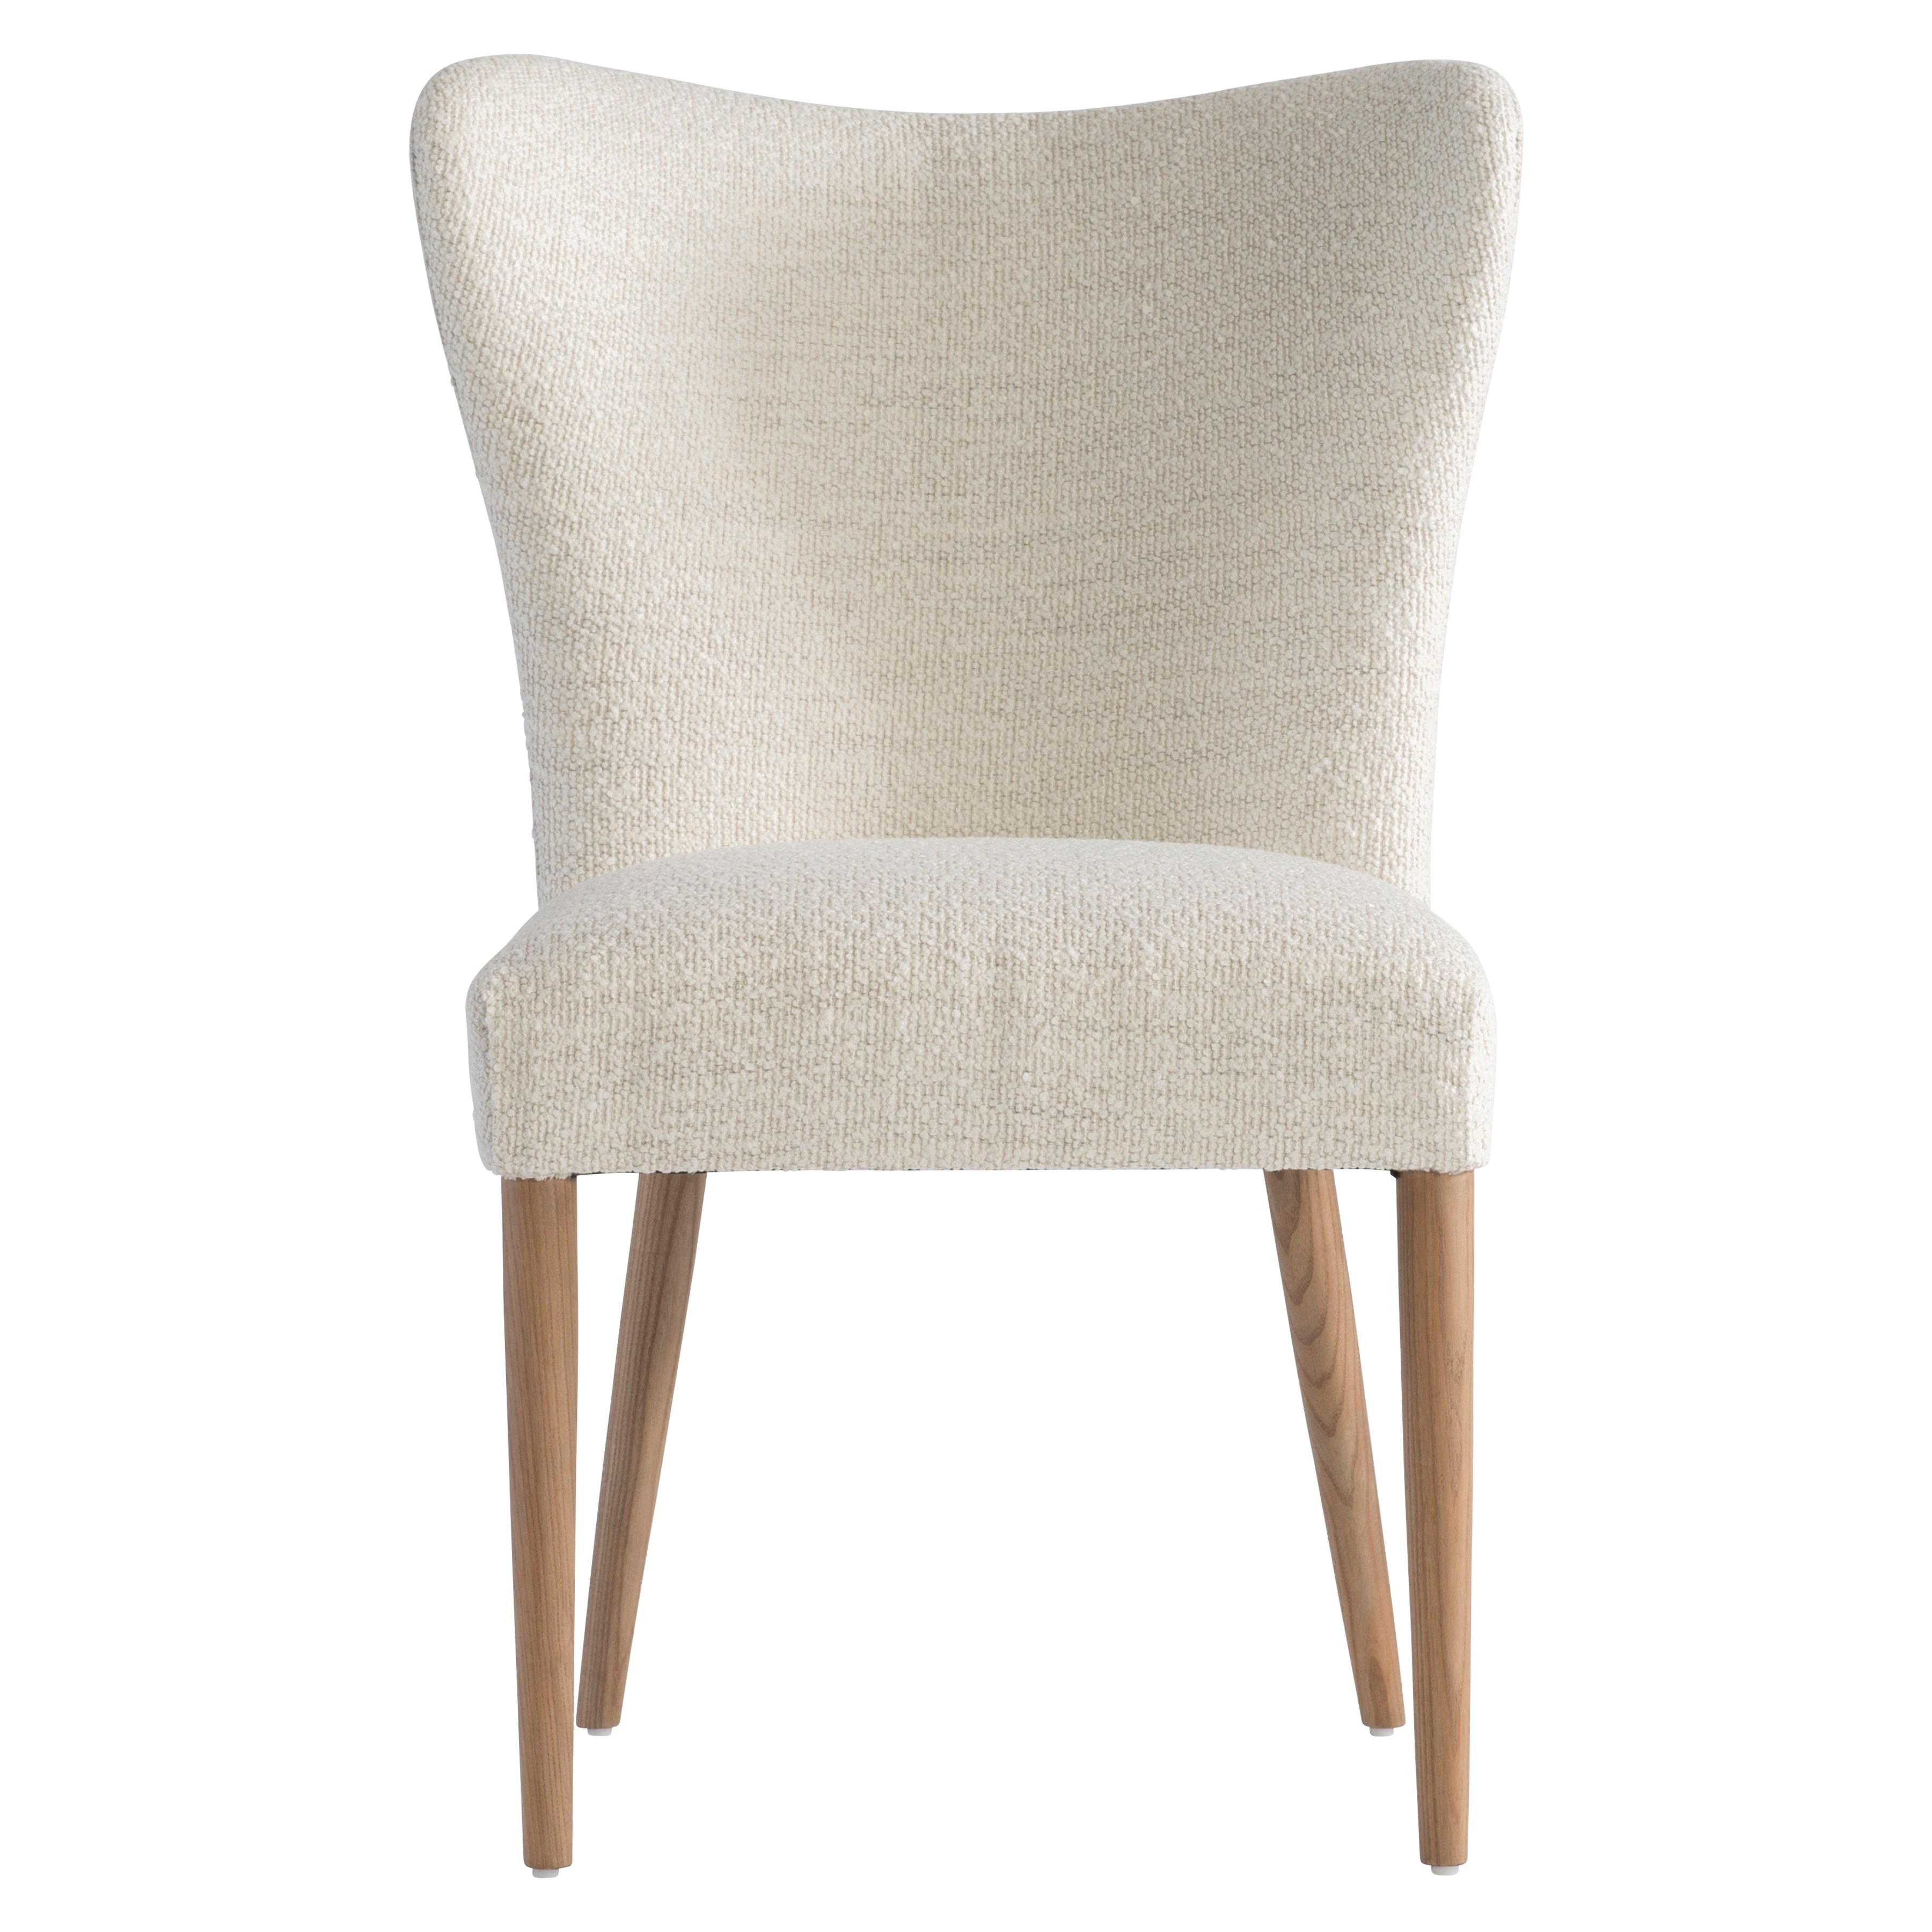 Modulum Side Chair with Curved Back